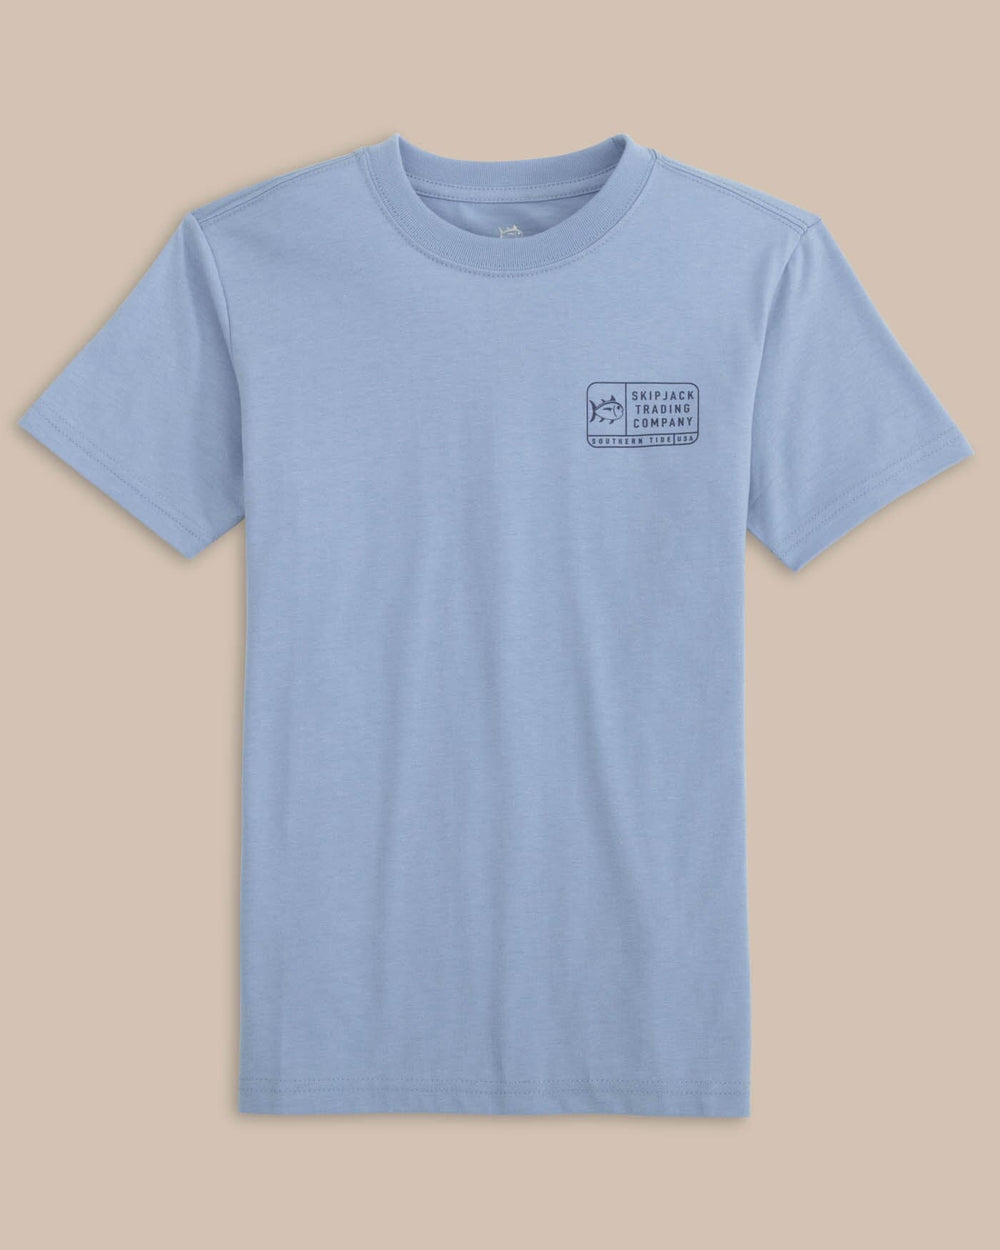 The front view of the Southern Tide Kids Skipjack Trading Co Short Sleeve T-Shirt by Southern Tide - Eternal Blue